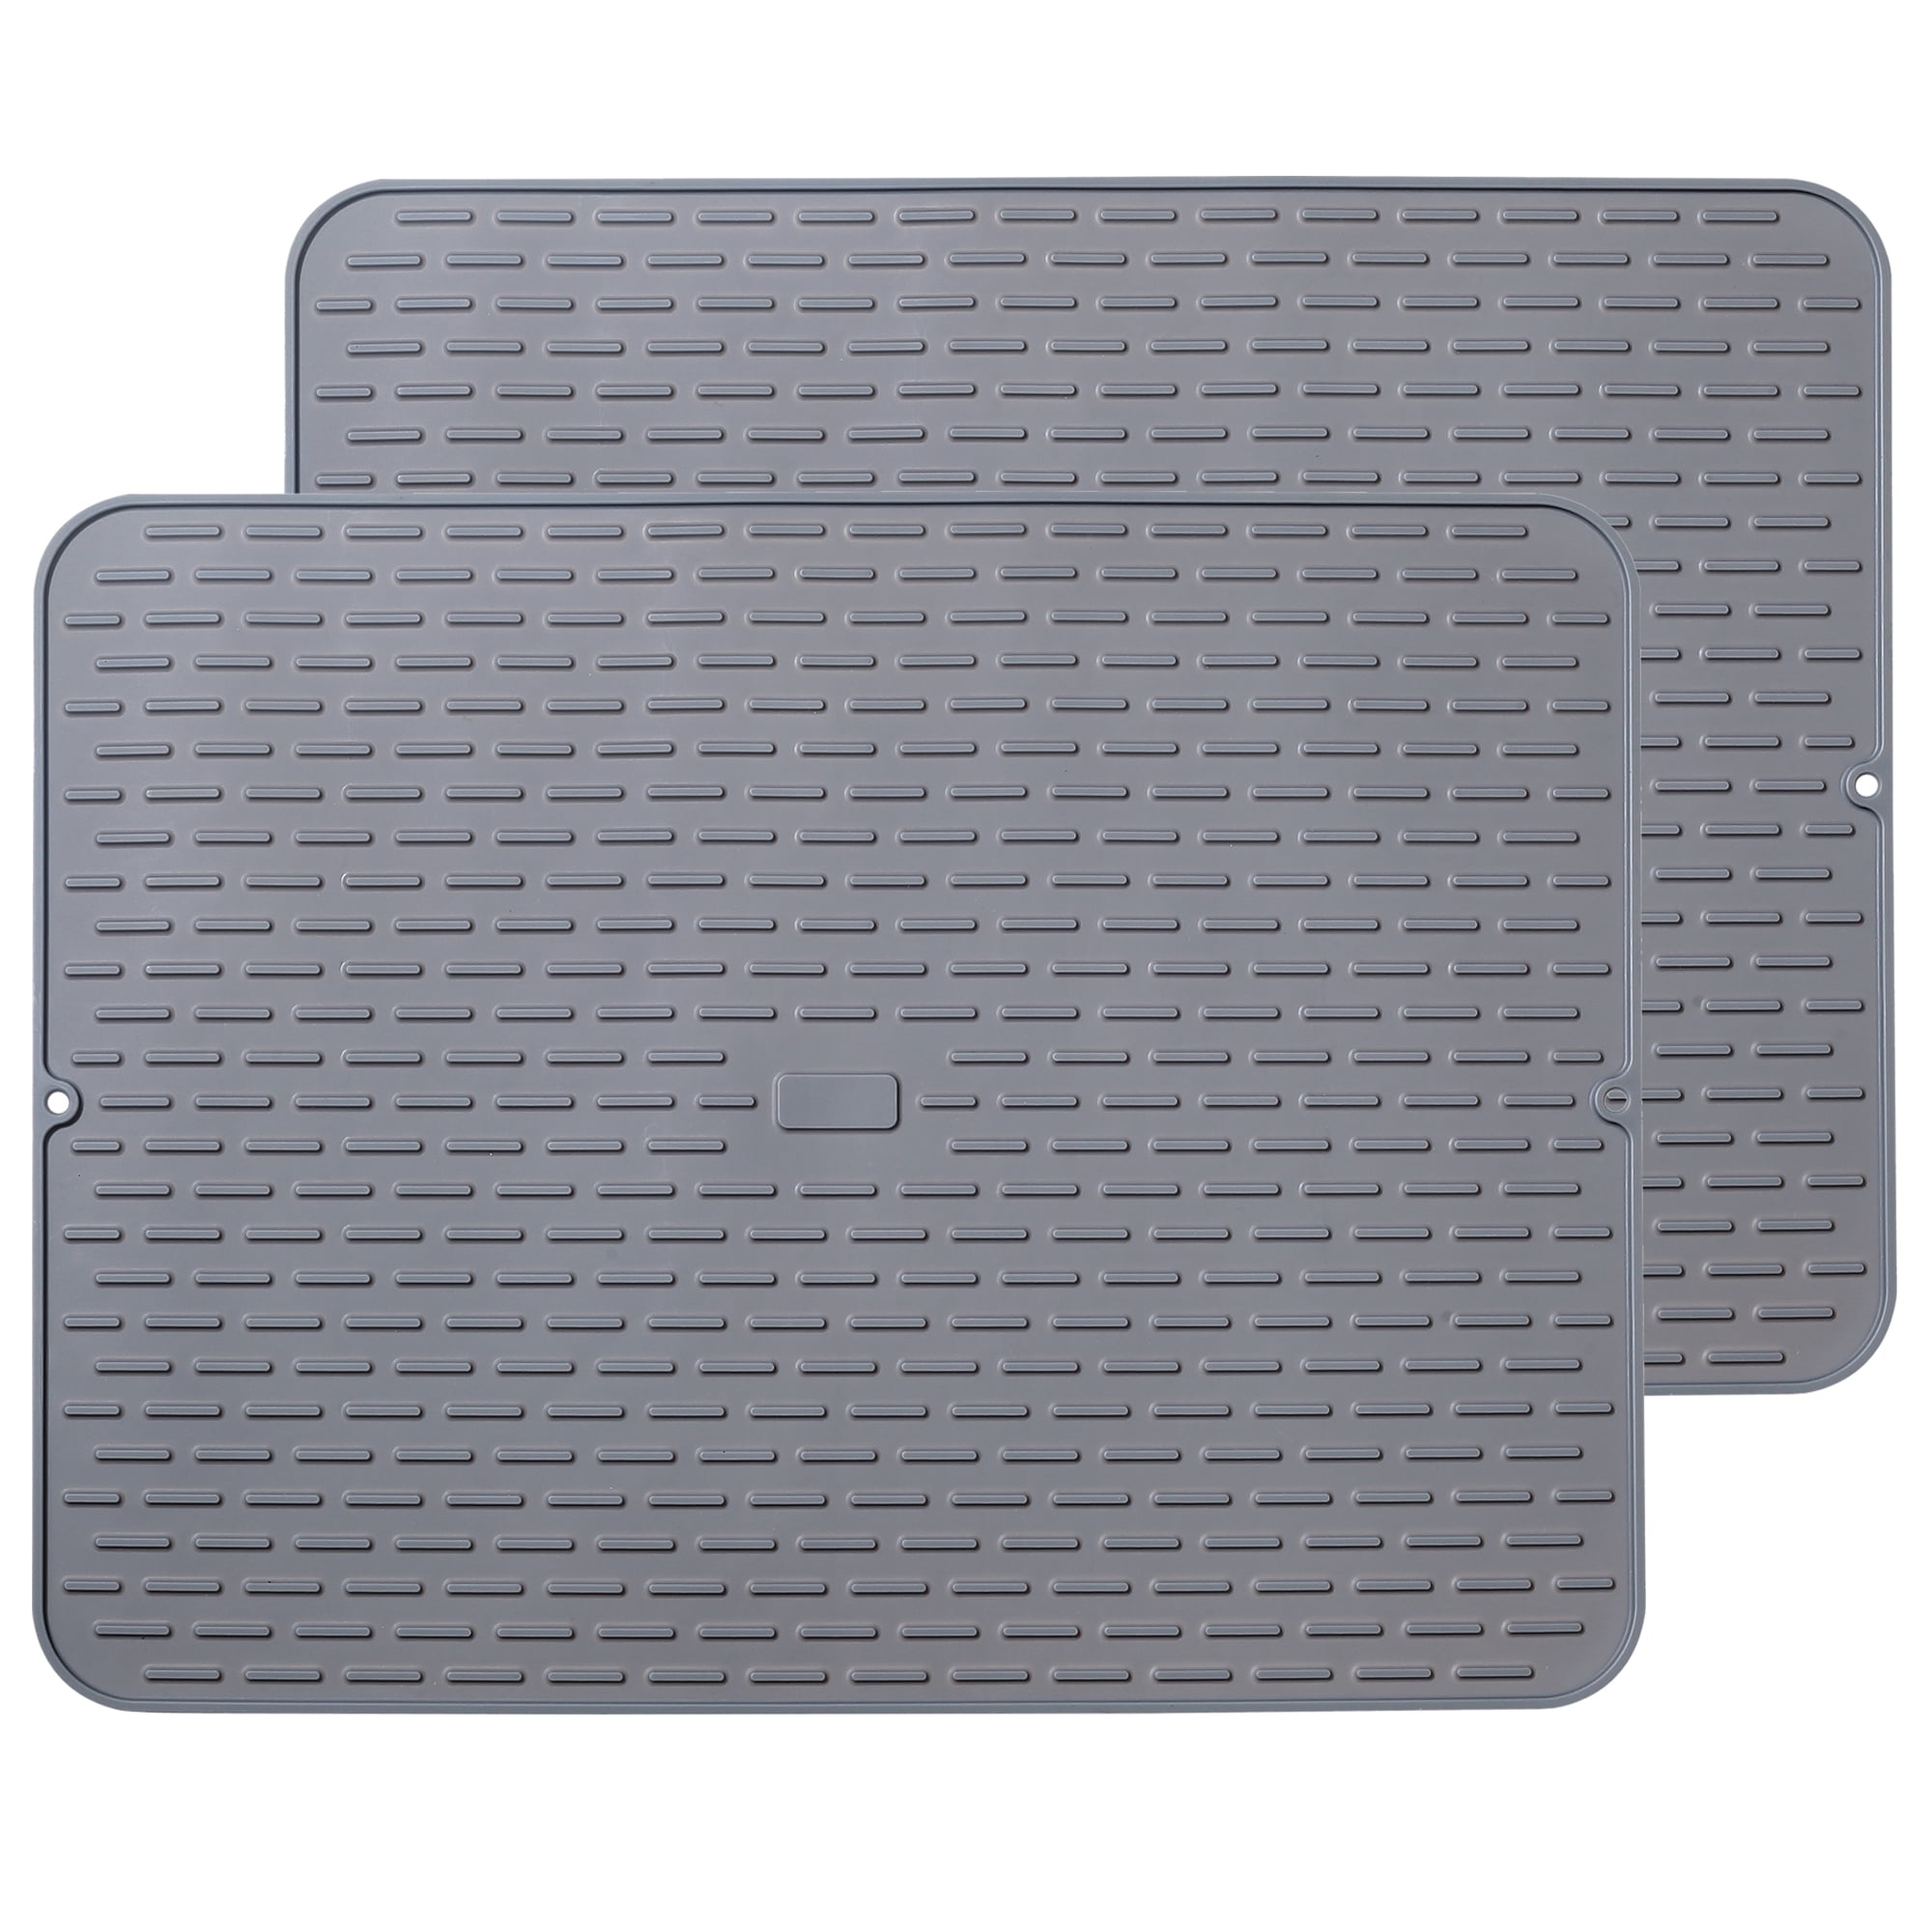 Extra Large (30 inch by 24 inch) heavy duty silicone dish drying mat (Gray,  XL - 30x24)